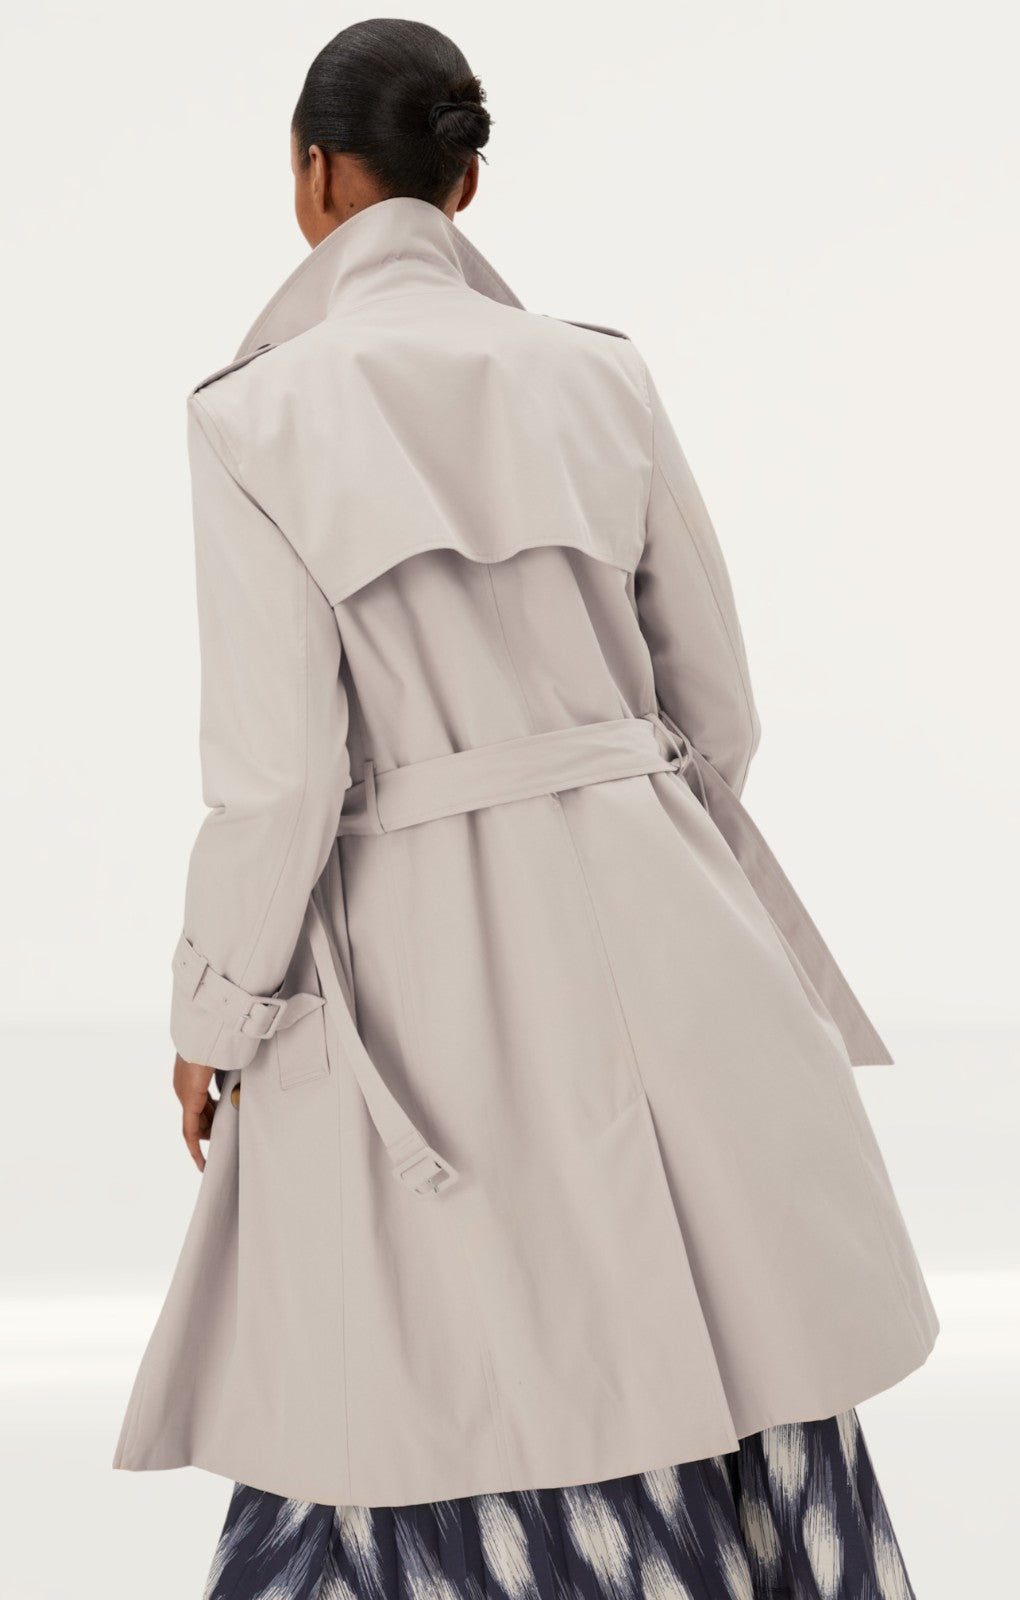 M&S Sand Essential Trench product image